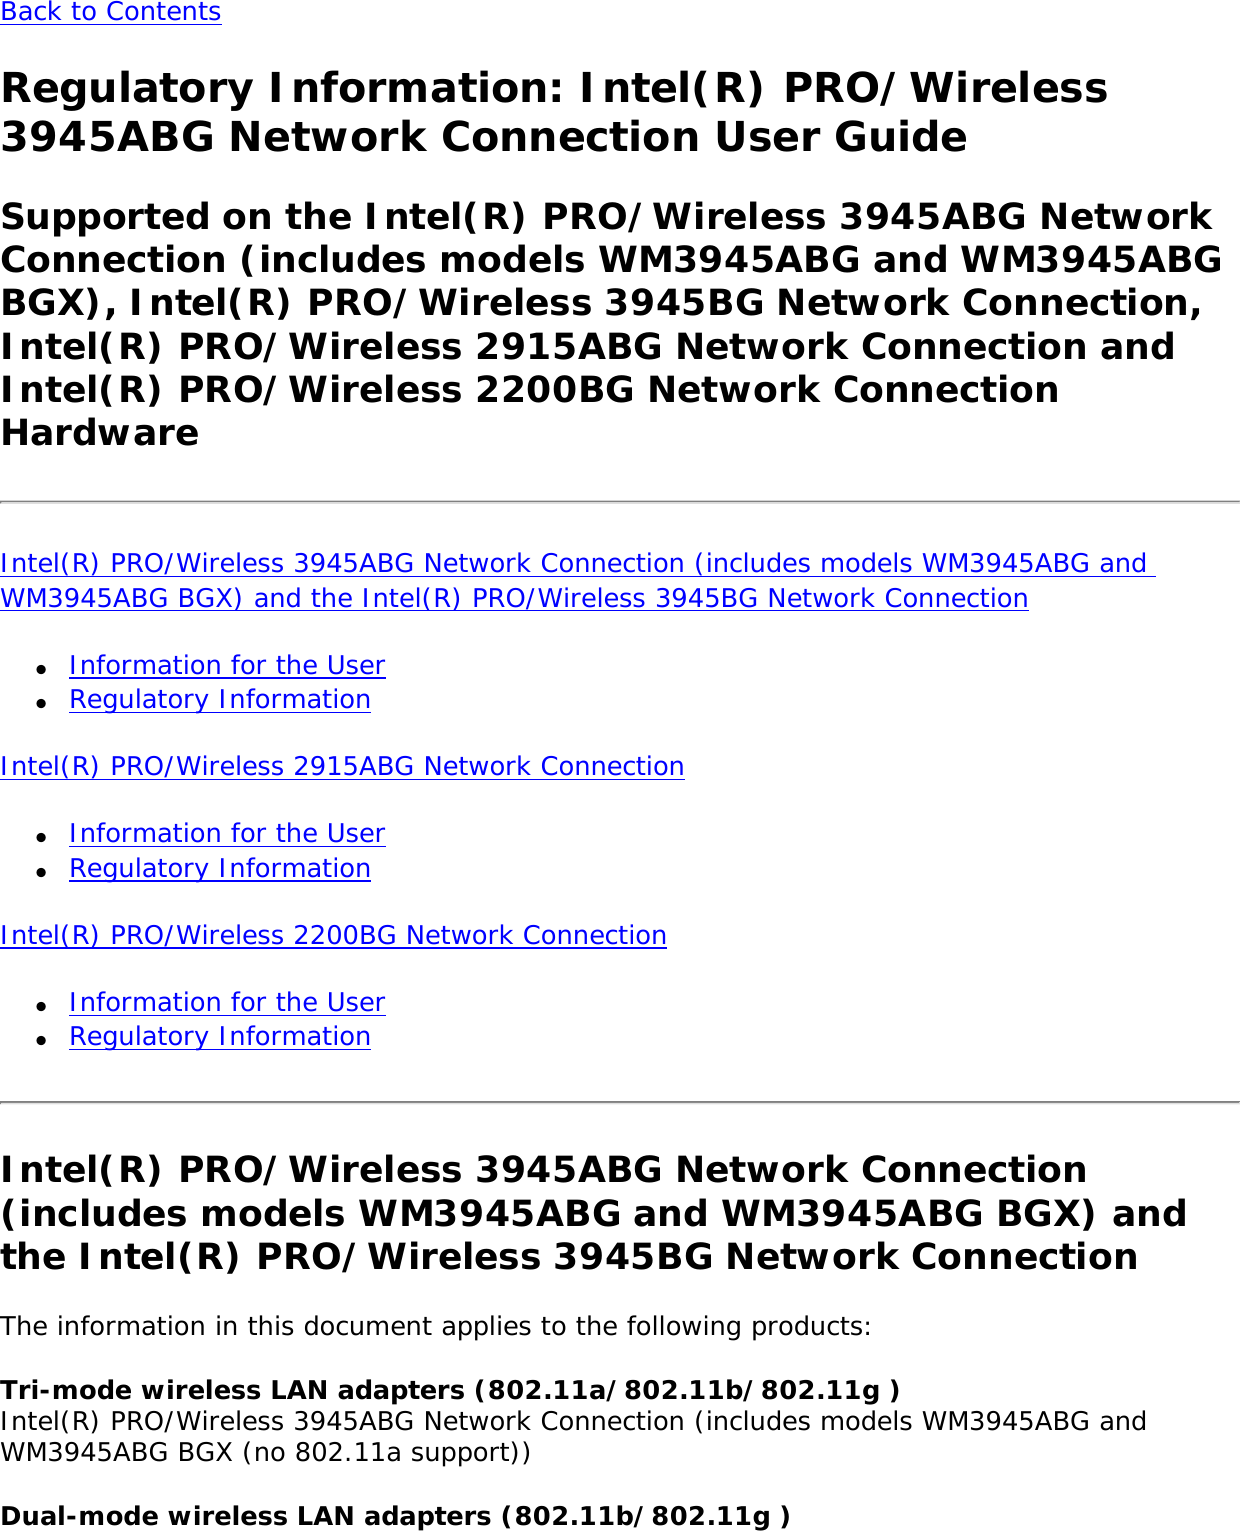 Network Product Support: http://www.intel.com/network Corporate Web Site: http://www.intel.com Back to Contents 